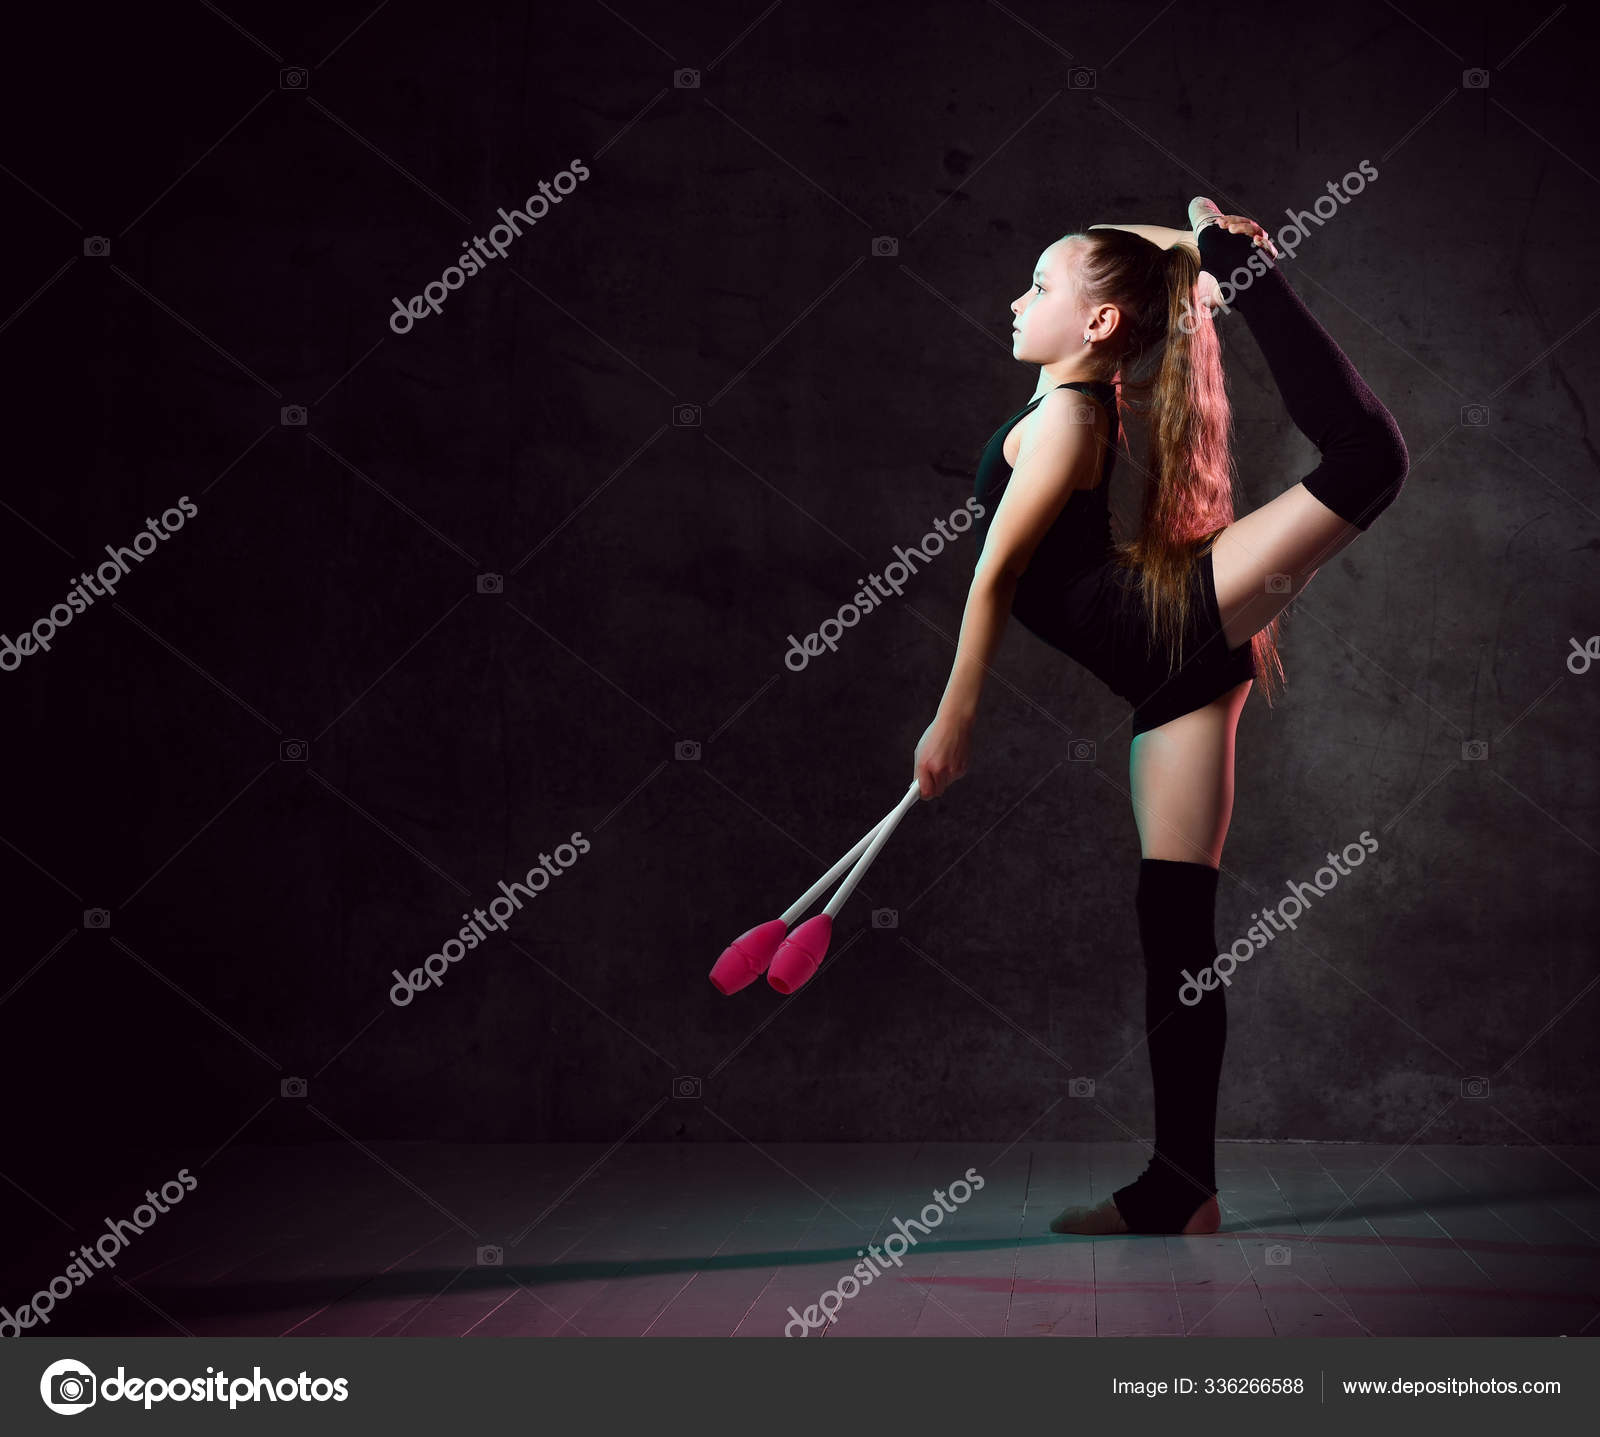 Young smiling girl gymnast in black sport body and uppers standing